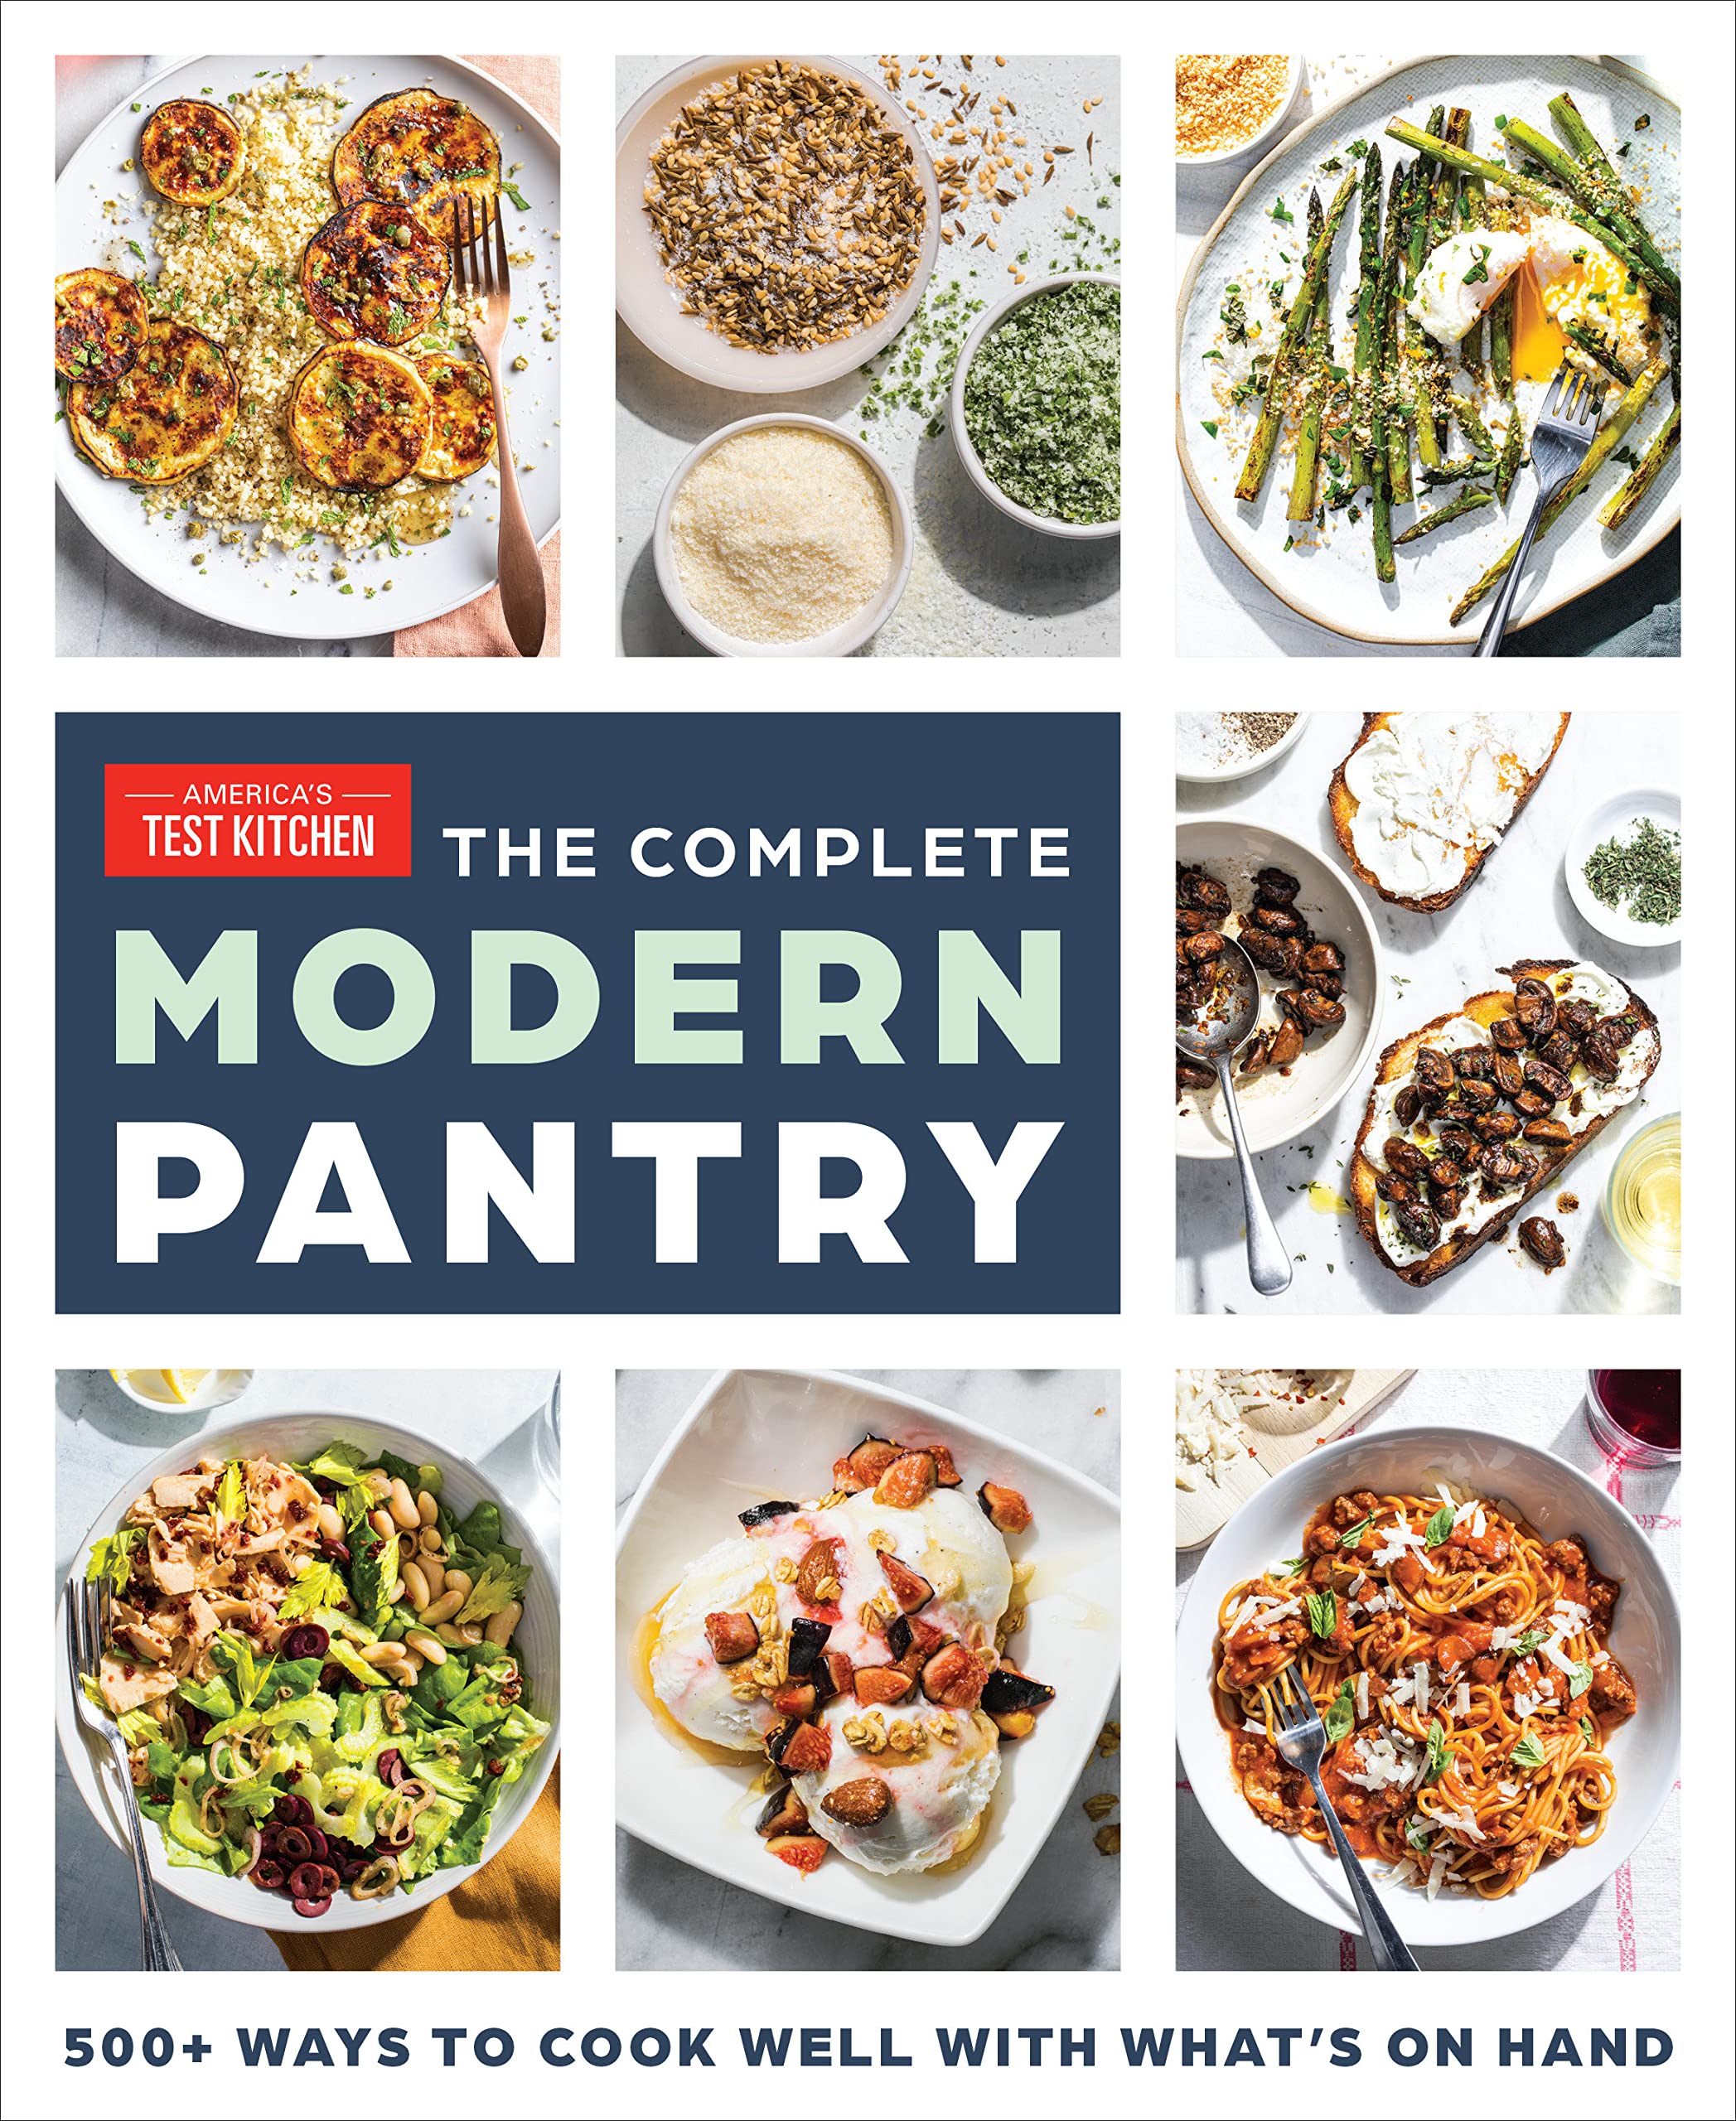 The Complete Modern Pantry Cookbook: 350+ Ways to Cook Well with What's on Hand (America's Test Kitchen)